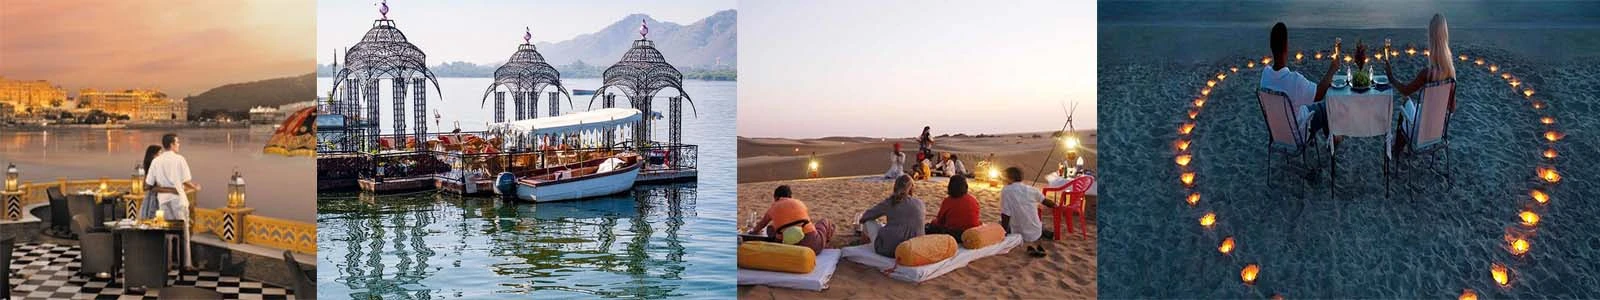 Private Rajasthan 10 Day Honeymoon Tour from Delhi